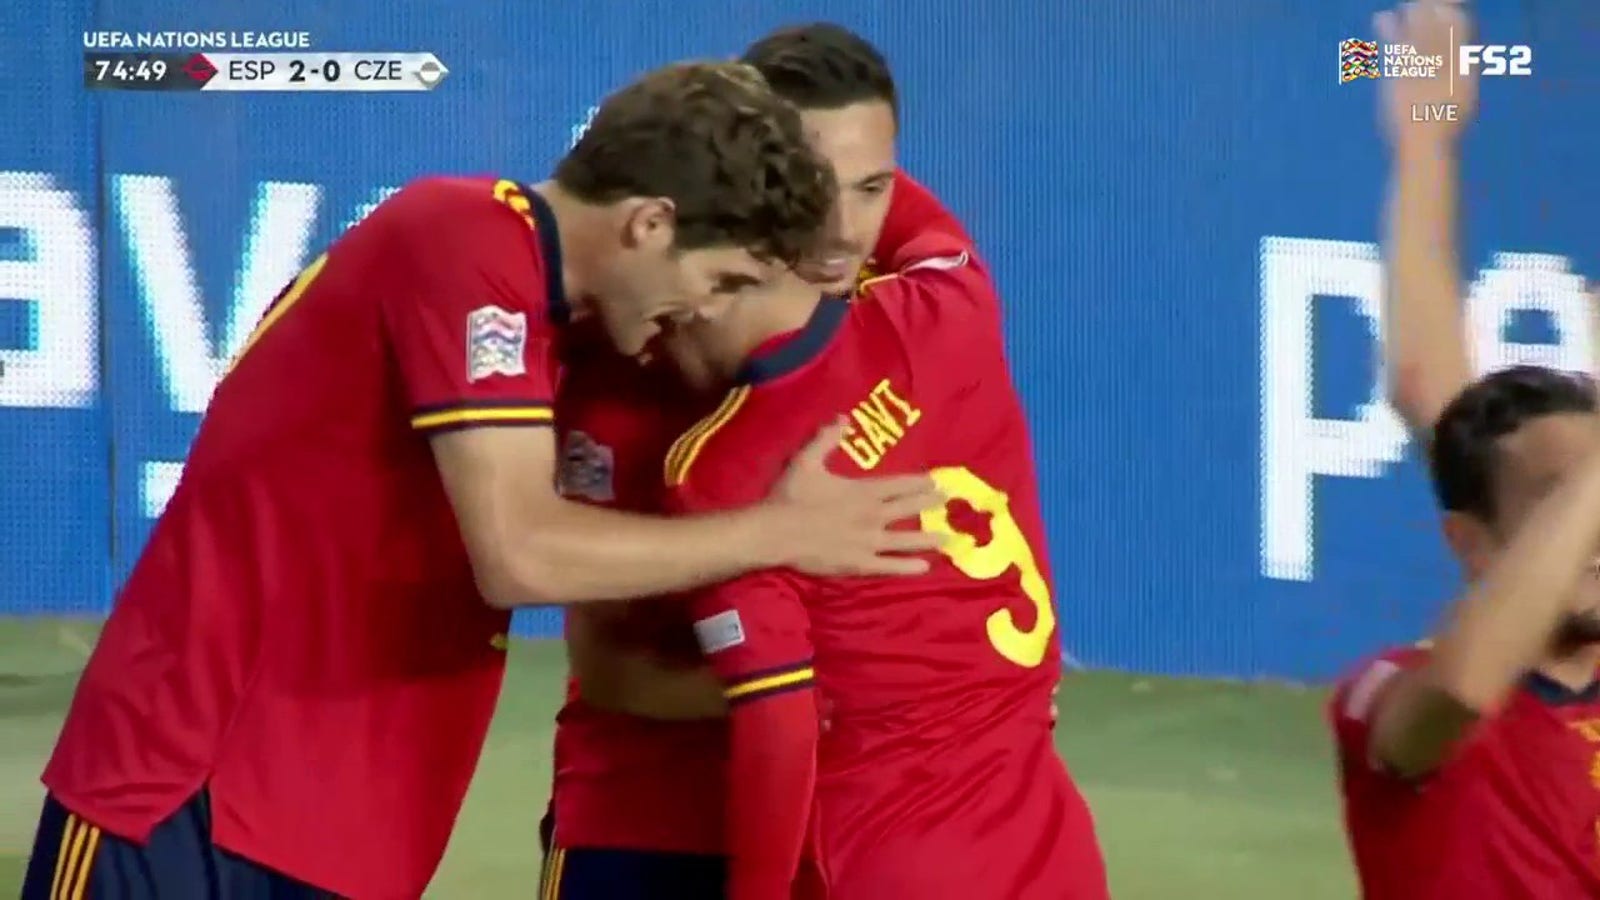 Pablo Sarabia scores in the 75th minute to give Spain a 2-0 lead